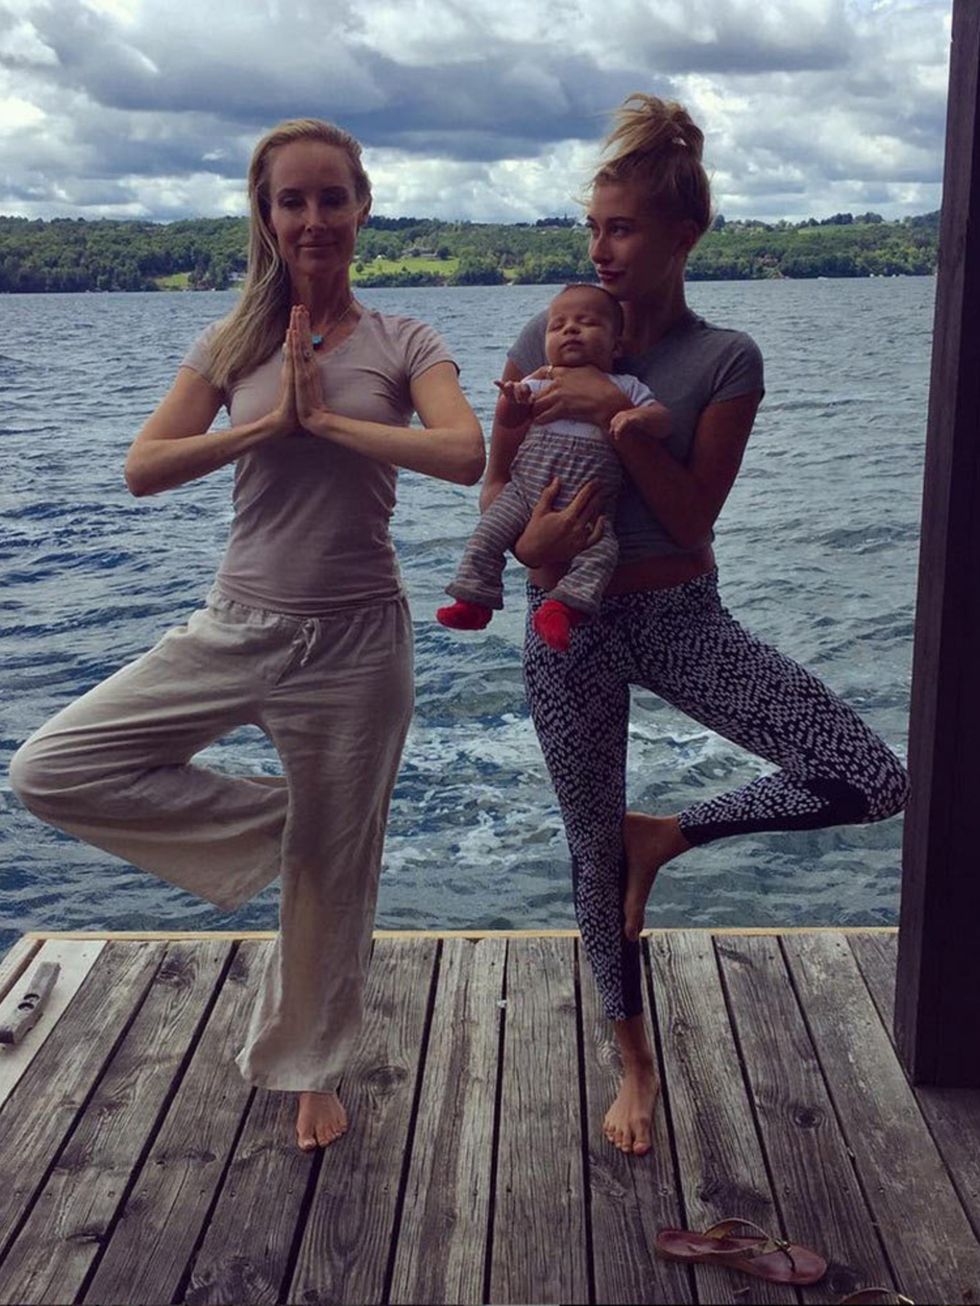 <p><span style="line-height:1.6">'Fitness + babysitting @chynna_phillips'</span></p>